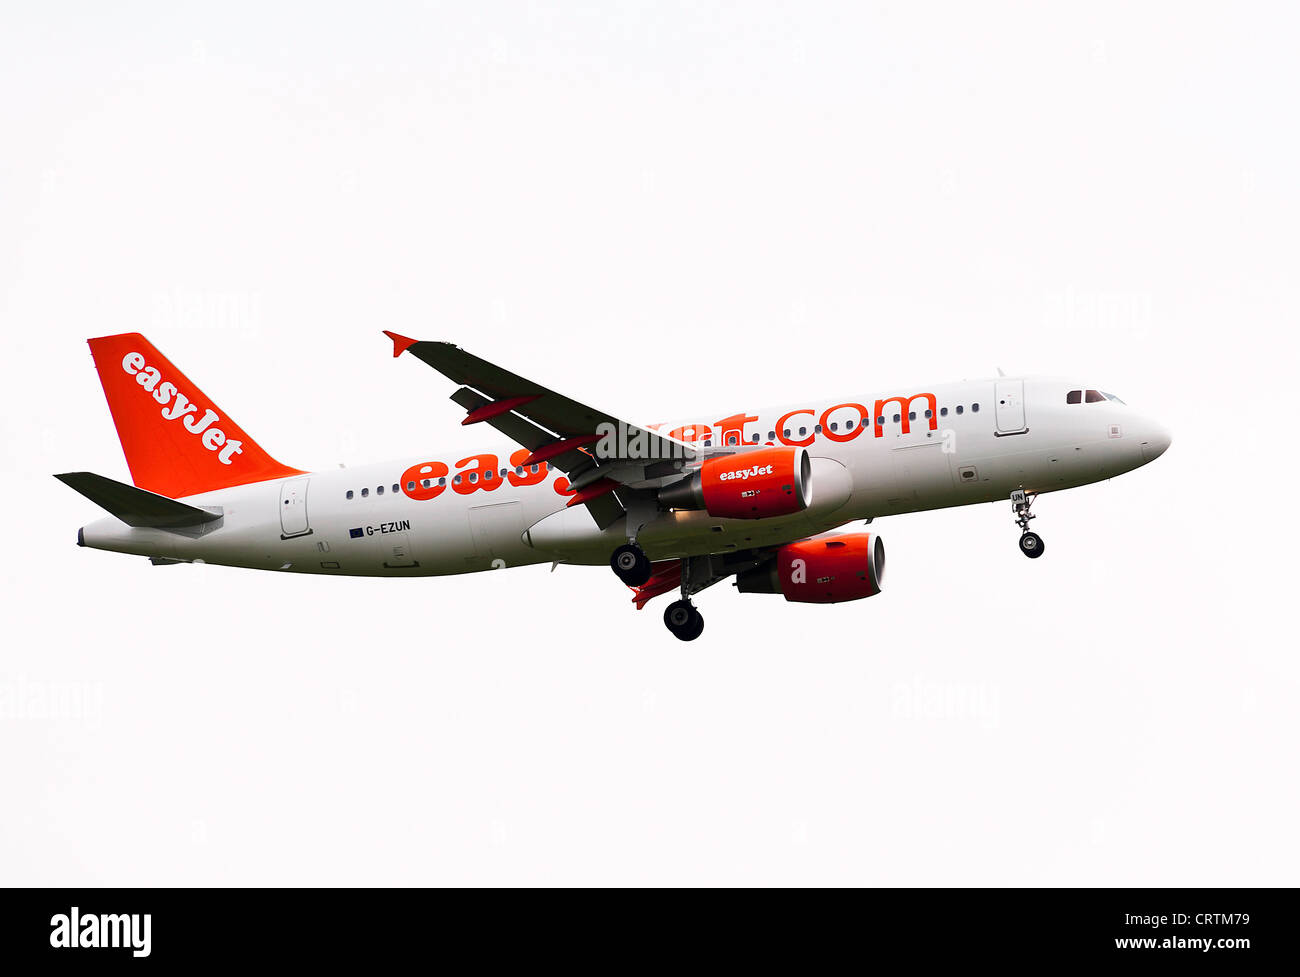 EasyJet Airbus A320-214 Airliner G-EZUN on Approach to London Gatwick Airport West Sussex England United Kingdom Stock Photo